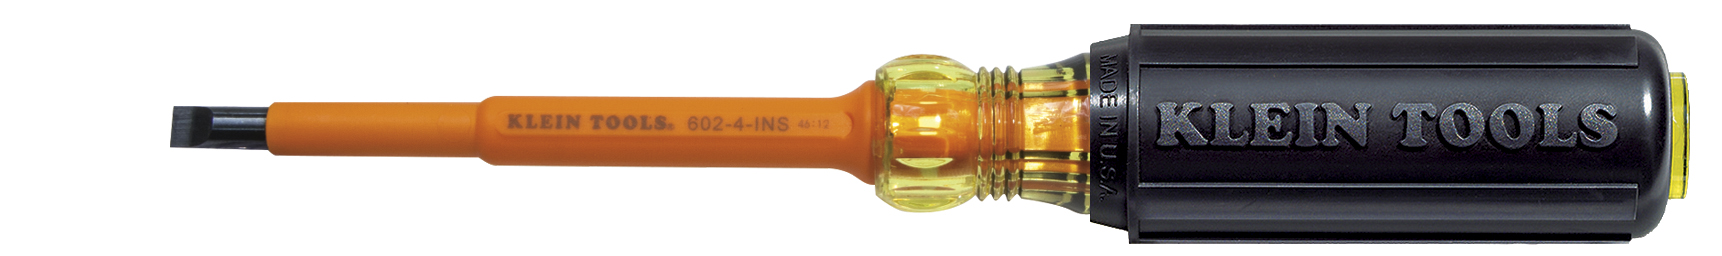 6024INS 1/4-Inch Cabinet Tip Insulated Screwdriver, 4-Inch - Image